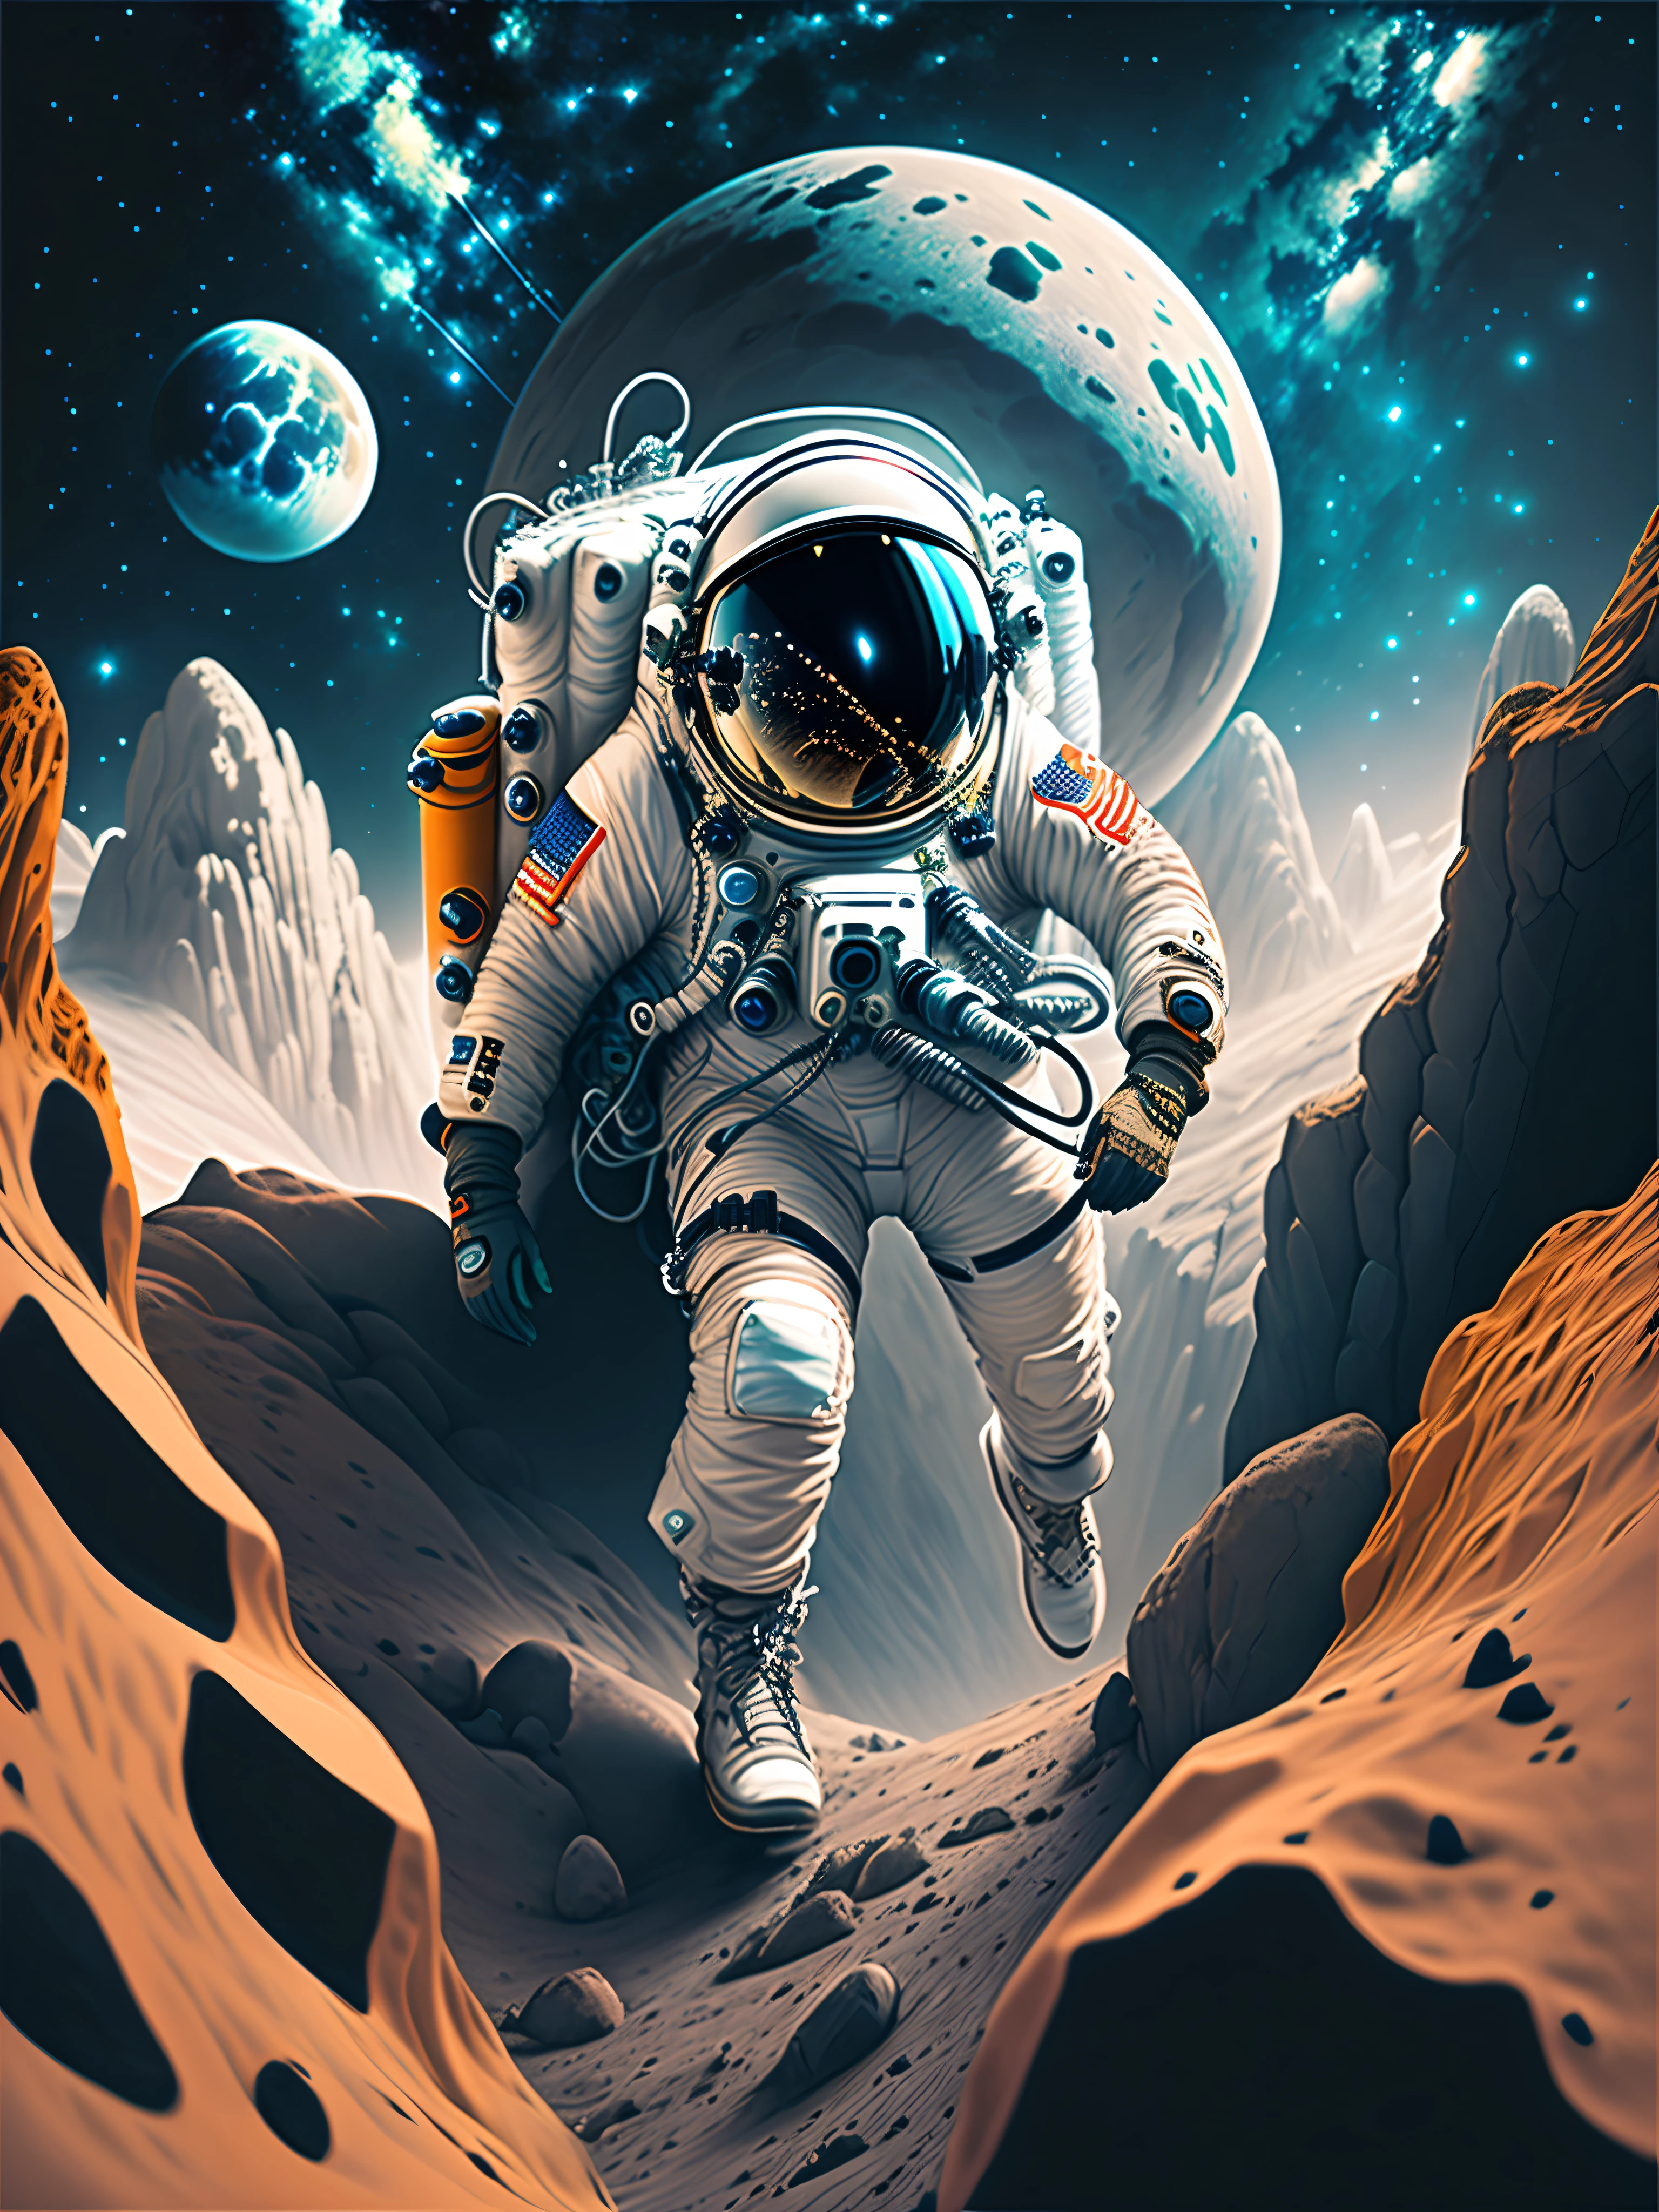 (Close-up of astronaut climbing a rocky cliff in a Raumsuit), fully Raum suited, astronaut lost in liminal Raum, dusty Raum suit, Astronaut, astronaut in Raum, ("Lunar Raum" Theme）, detaillierter Astronaut, astronaut in Raum, Raumanzug, Rotverschiebungsresonanz, （Astronauts climbing cliffs in Raum）, Astronaut unten, Raum backround, wear Raumsuits, Astronaut Cyberpunk Electric, Raum